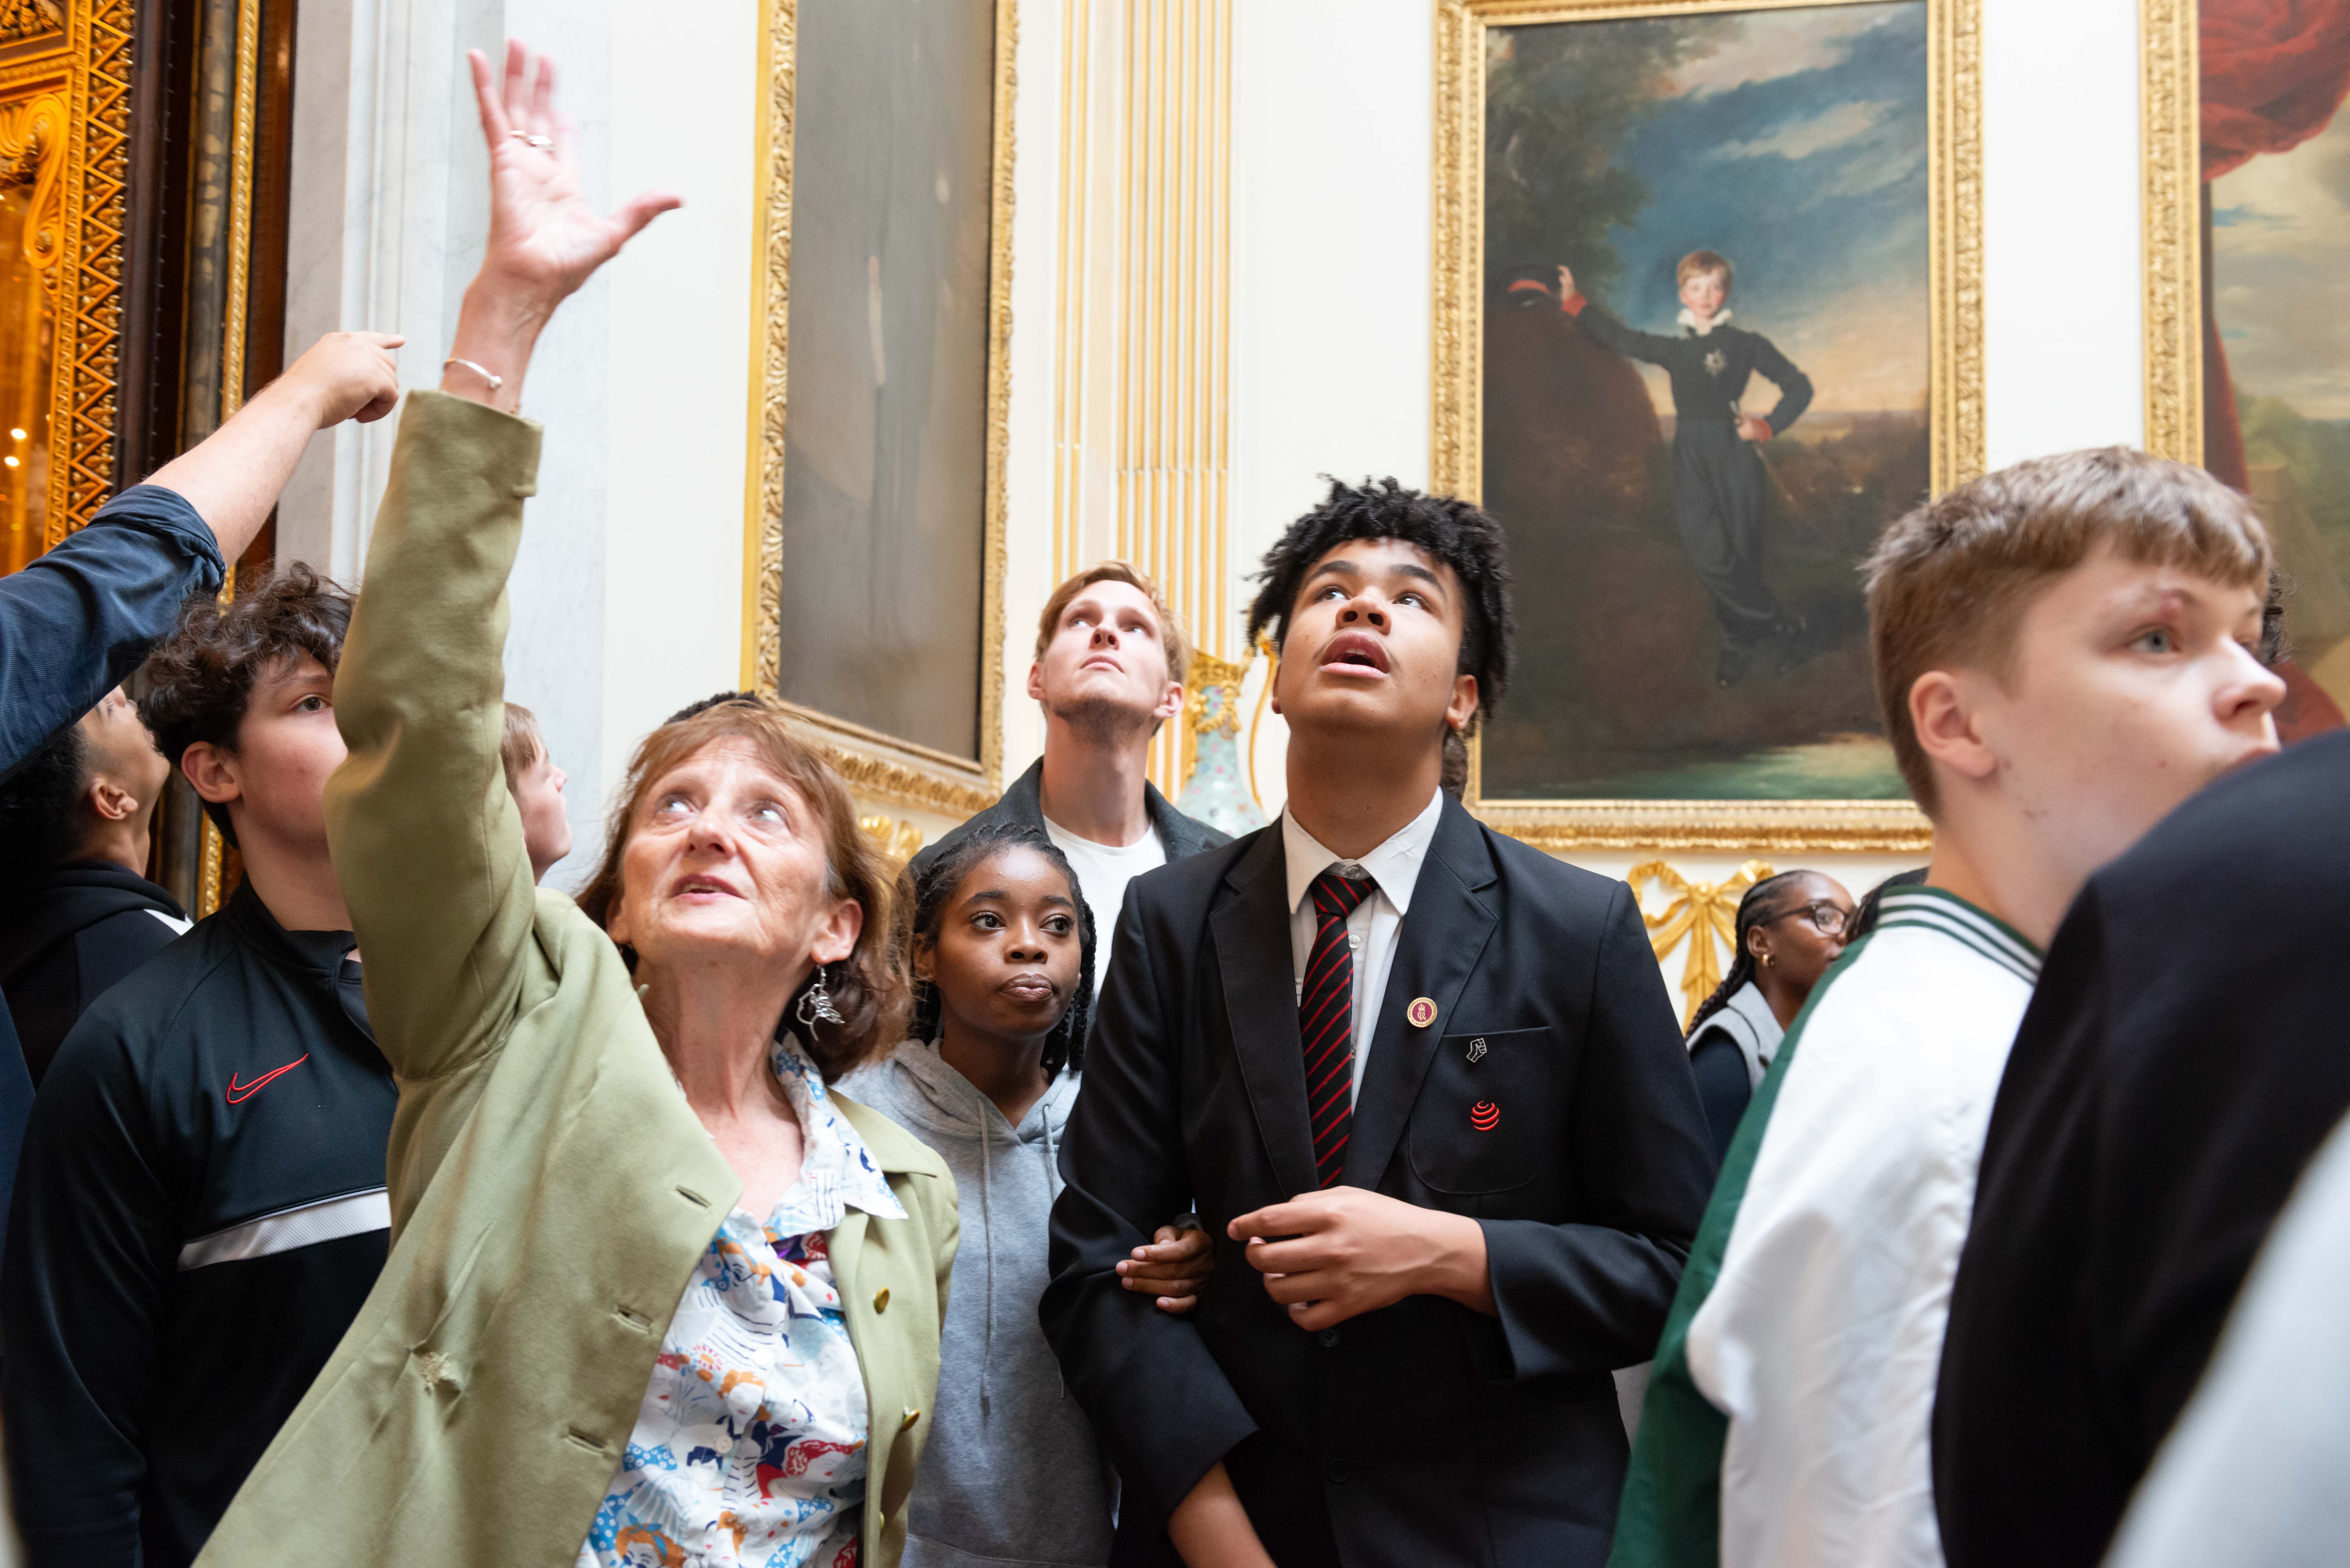 Teenage students look upwards towards the ceiling of the Grand Staircase